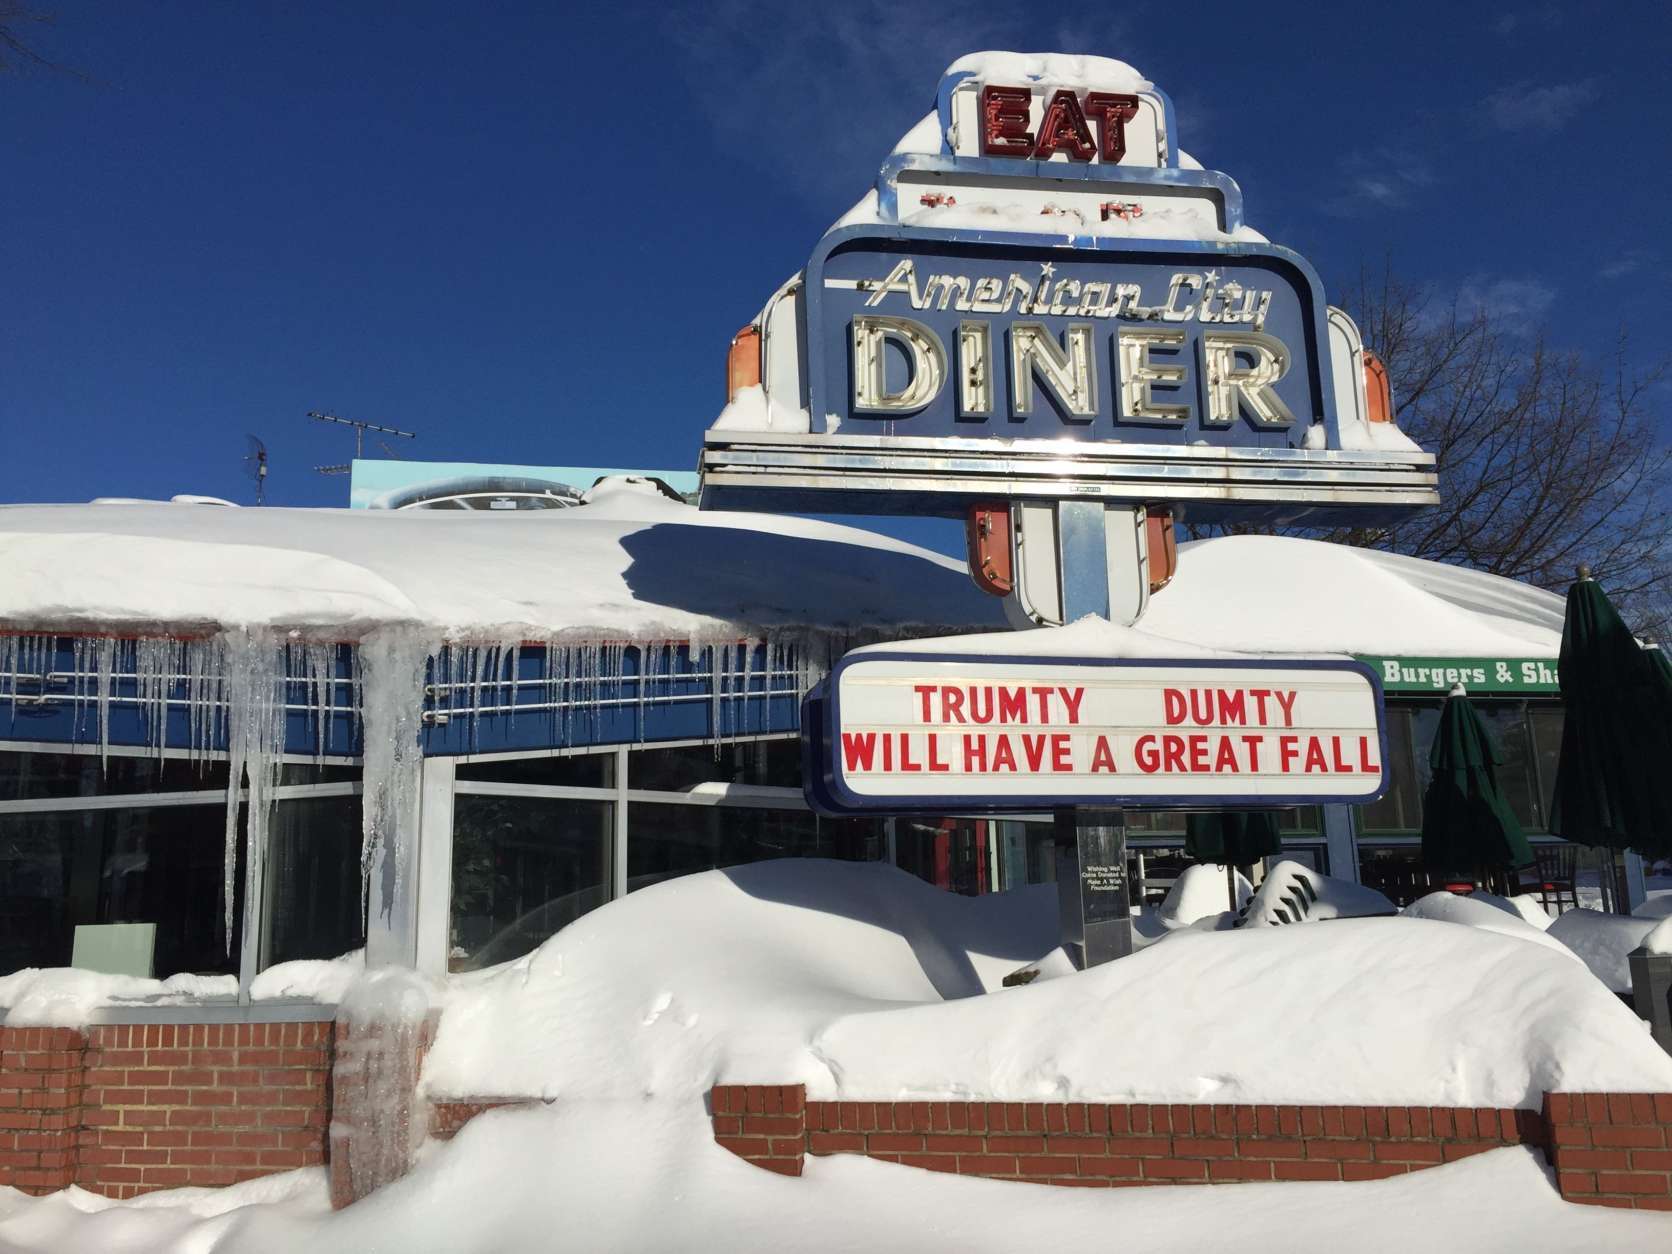 American City Diner in Chevy Chase, D.C., is known for its pancakes and political messages. (WTOP/Rachel Nania)